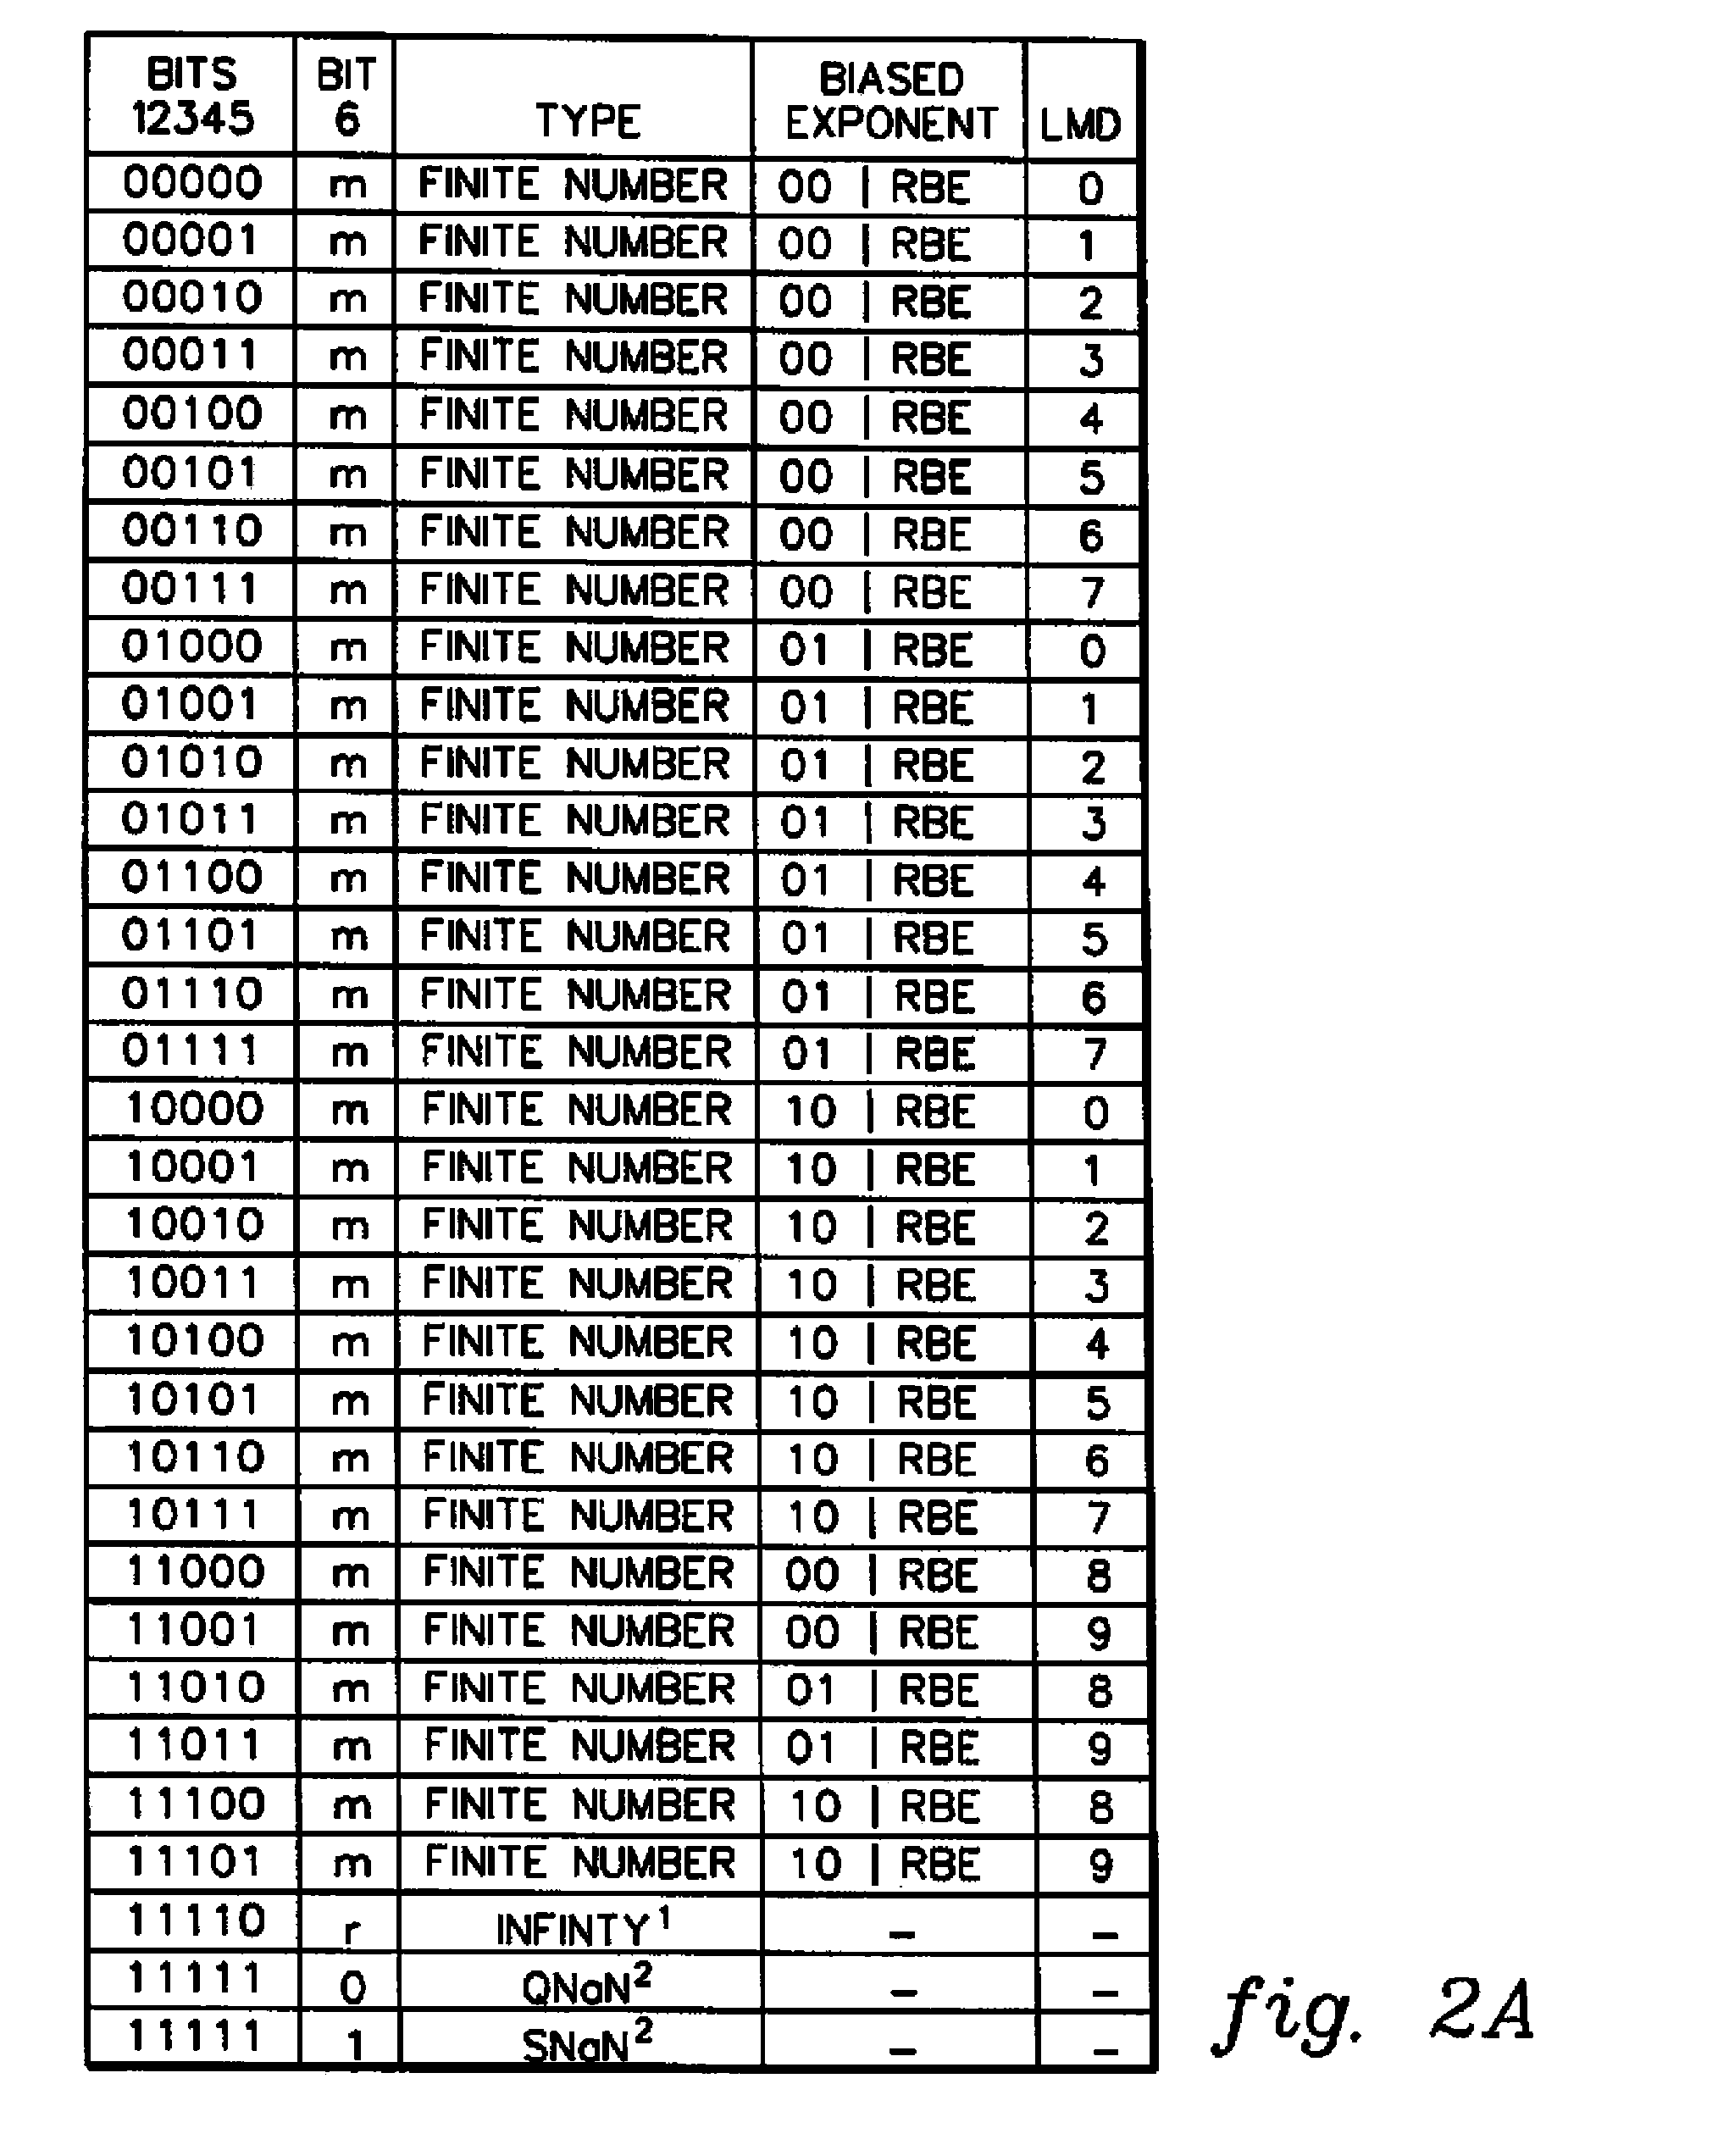 Extract biased exponent of decimal floating point data